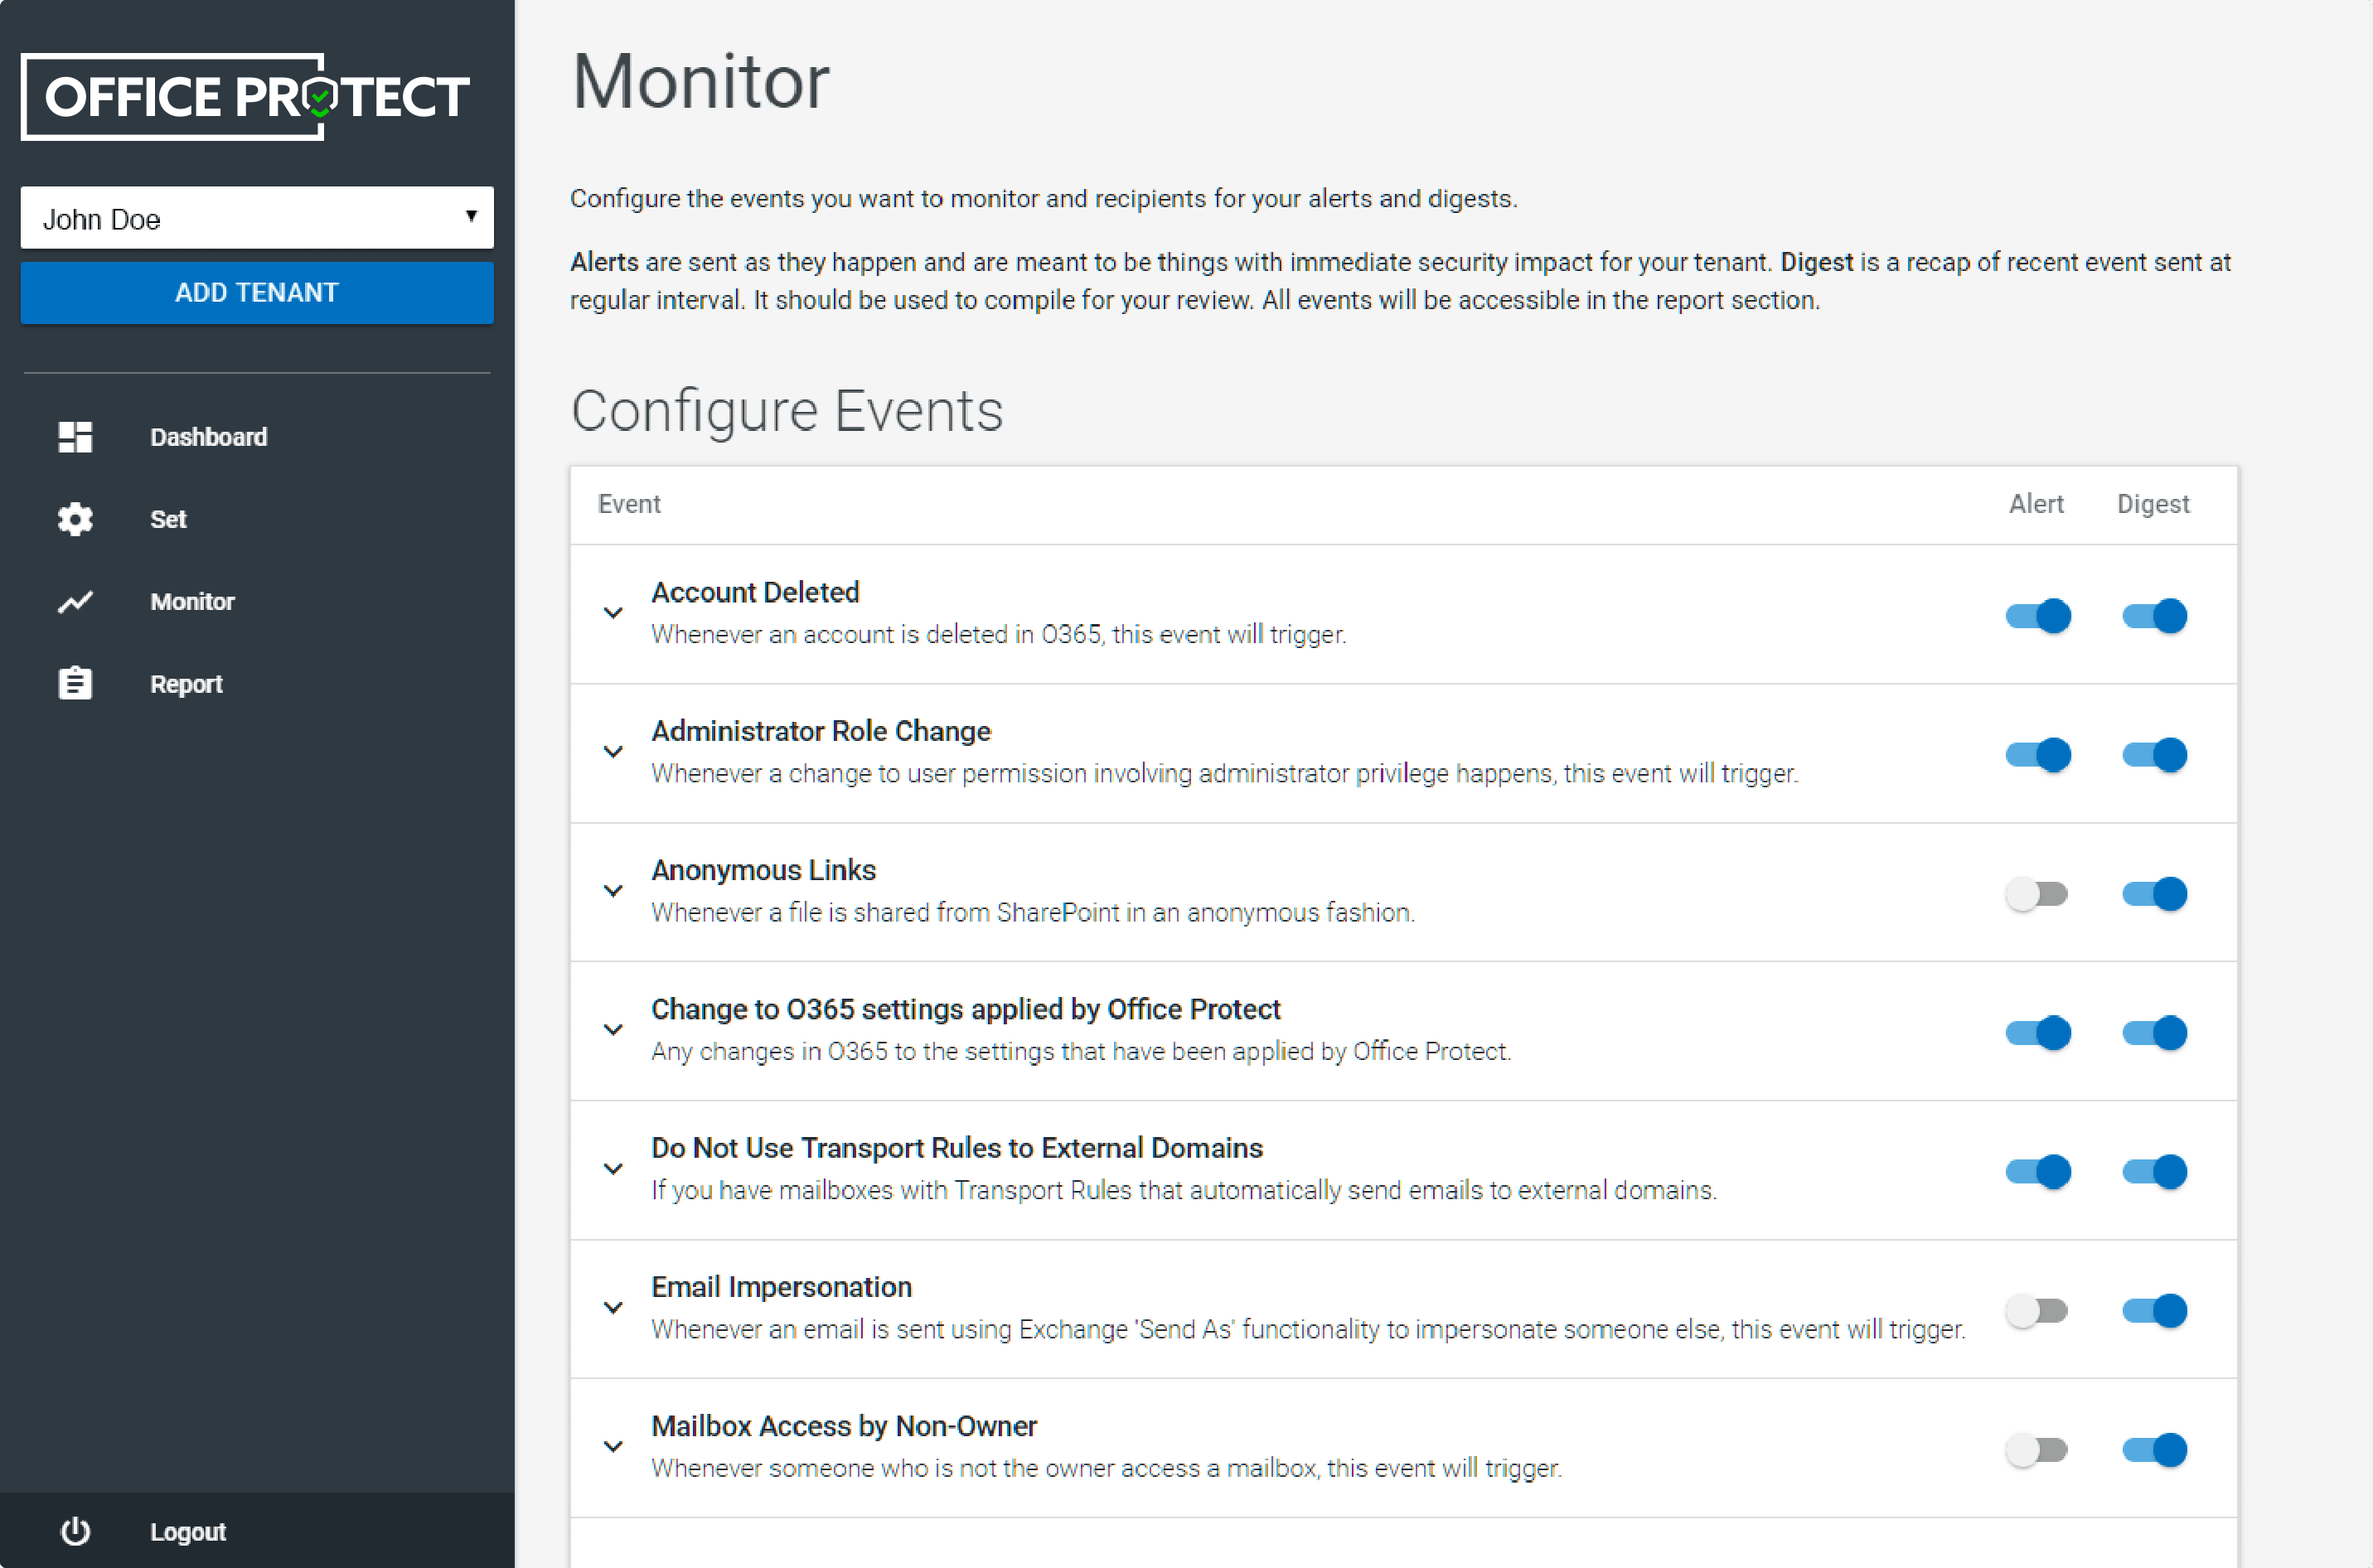 Office Protect: Monitoring & Alerts